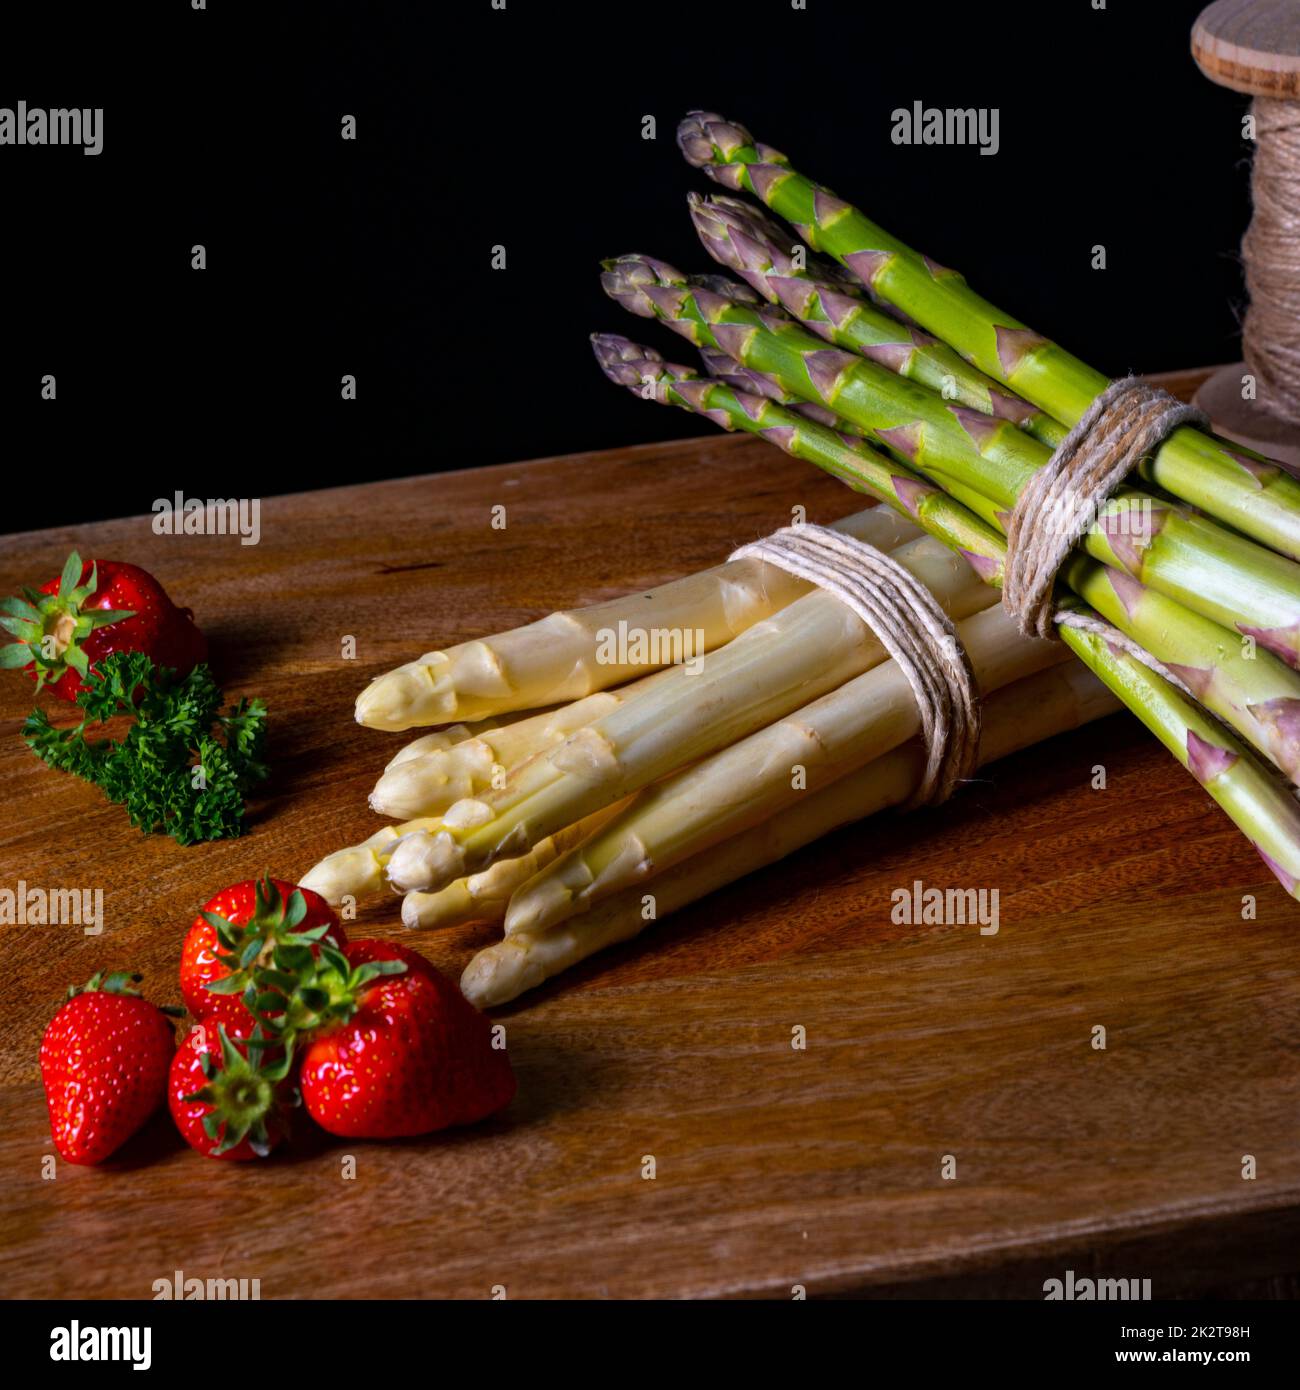 Green and white asparagus on the table Stock Photo